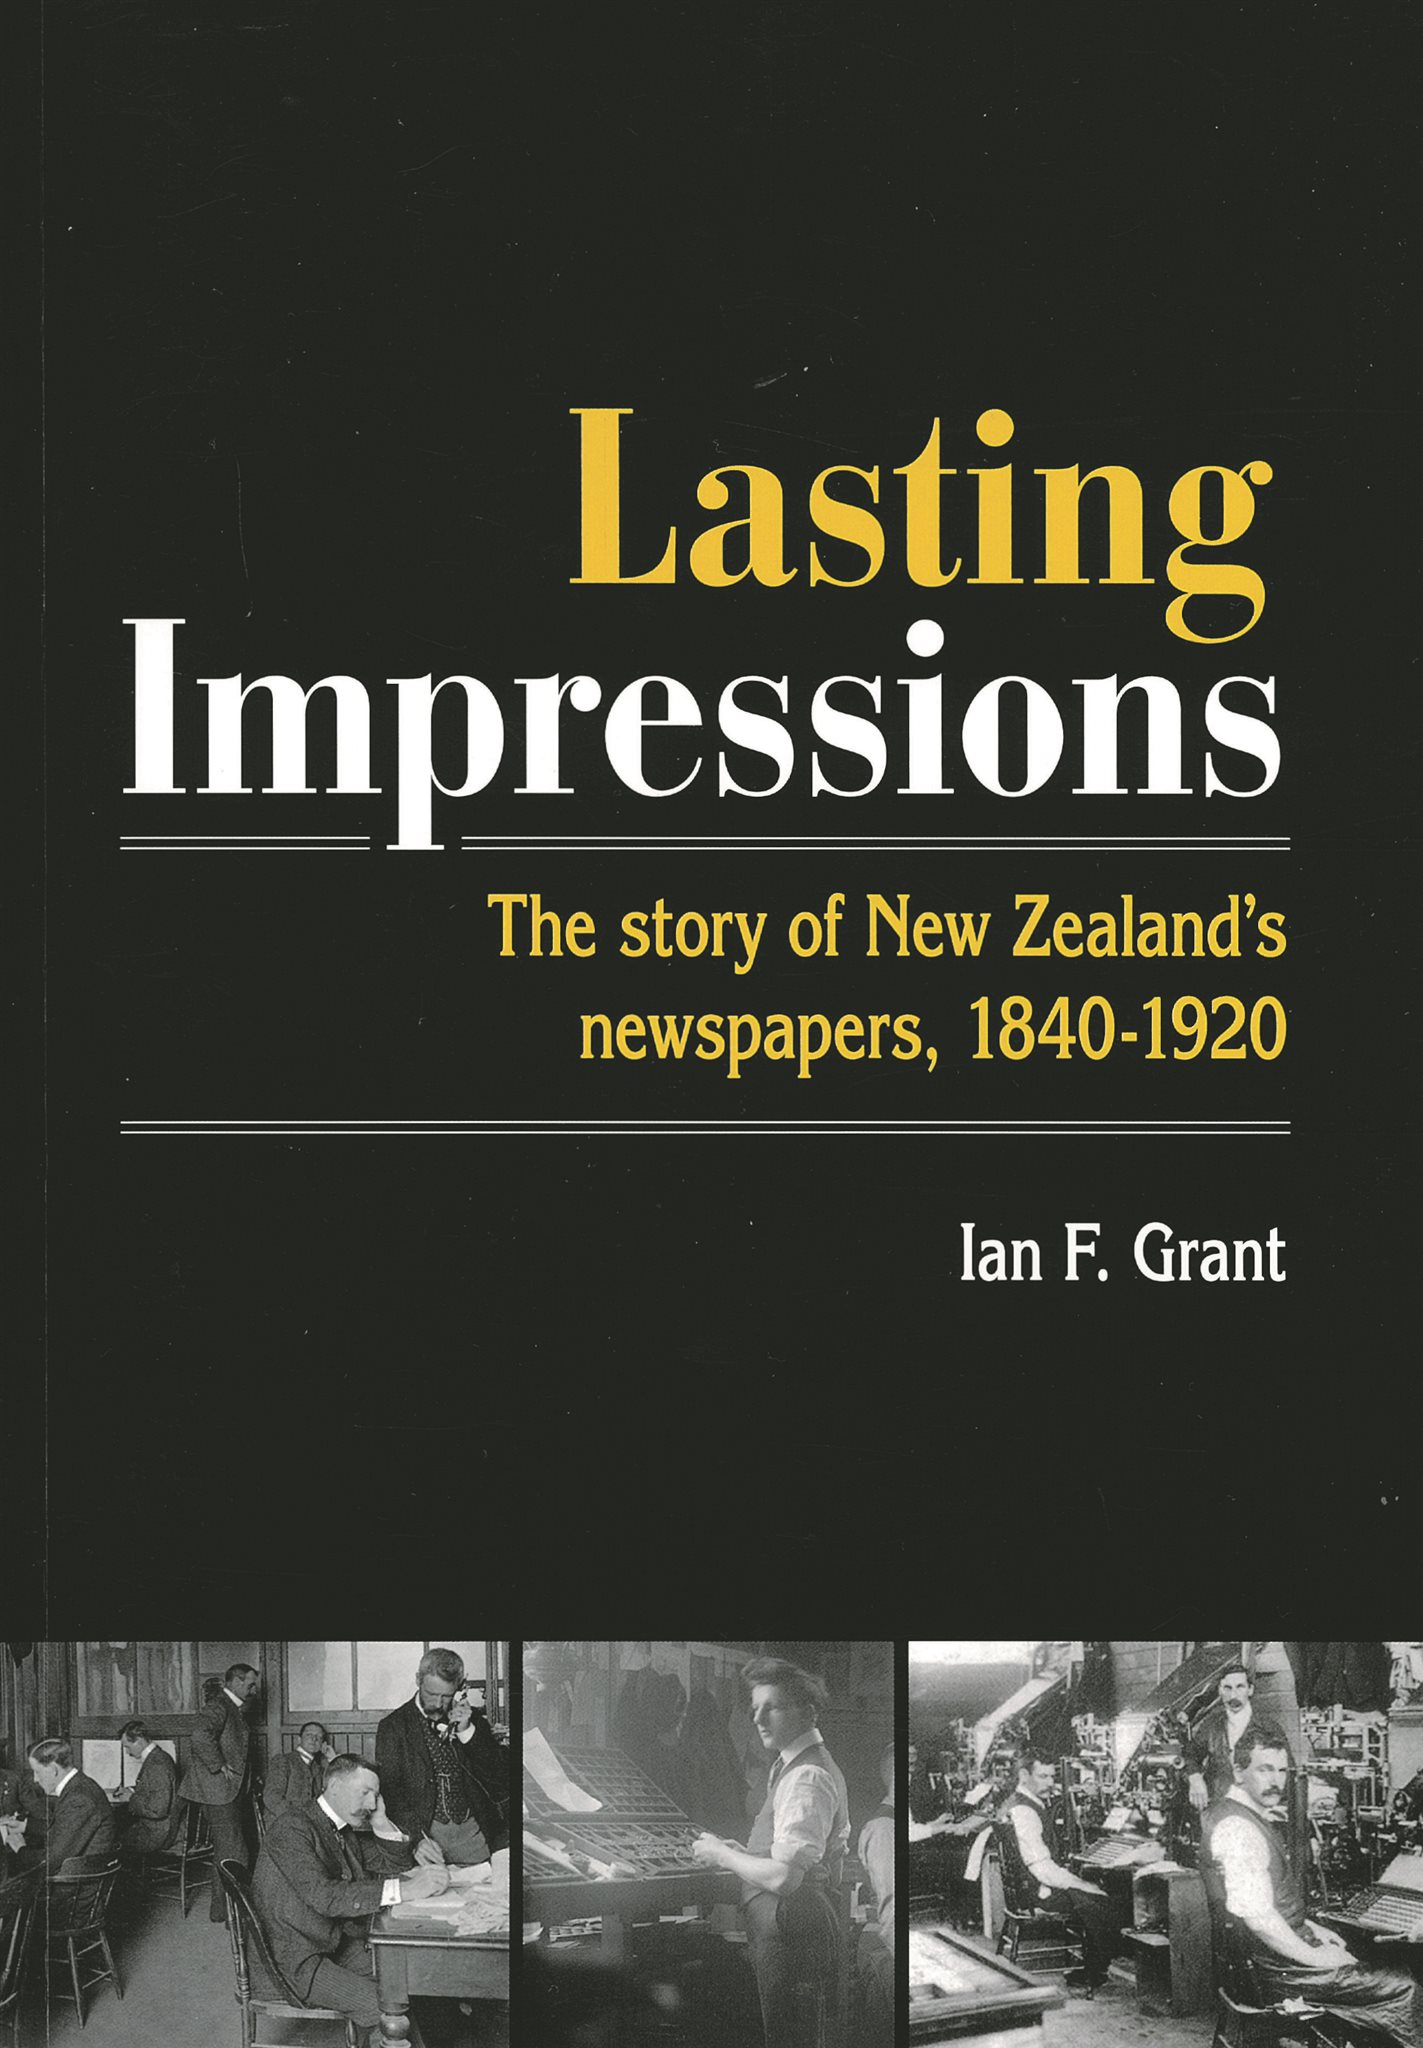 Lasting Impressions: The Story of New Zealand’s newspapers, 1840-1920